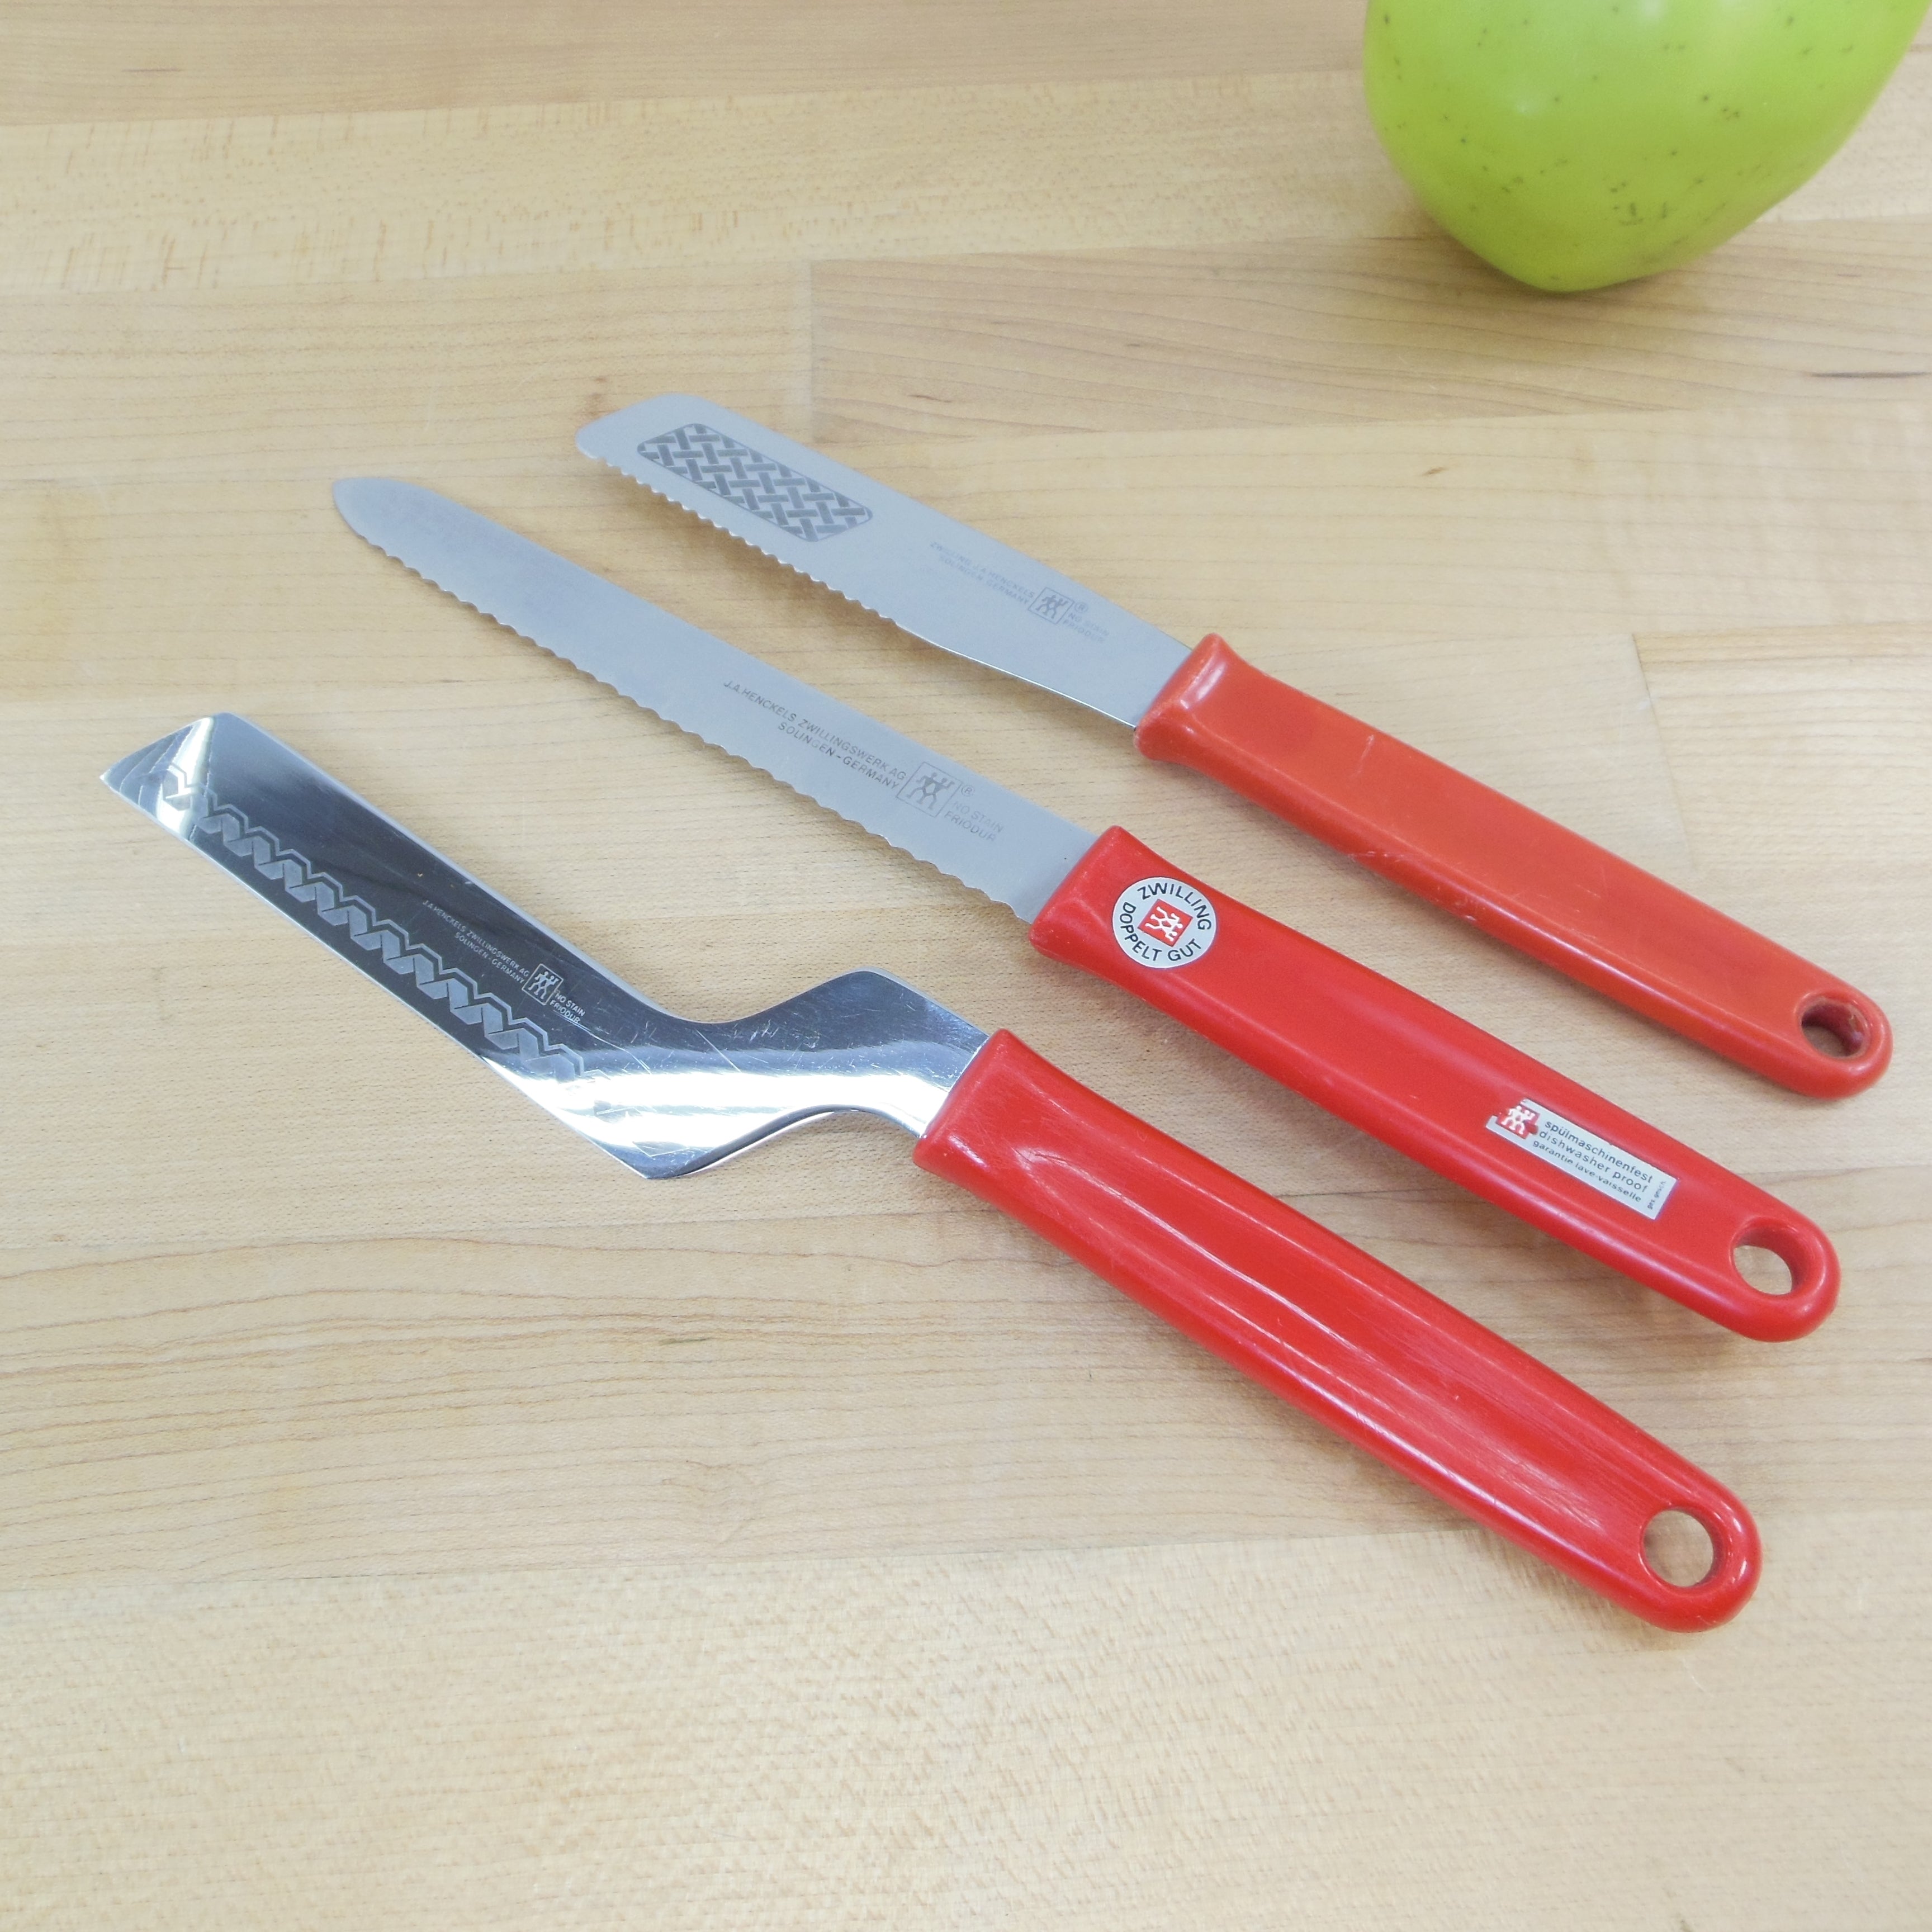 The Kosher Cook, 3 Inch German Steel Paring Knives - Red (2 Pack